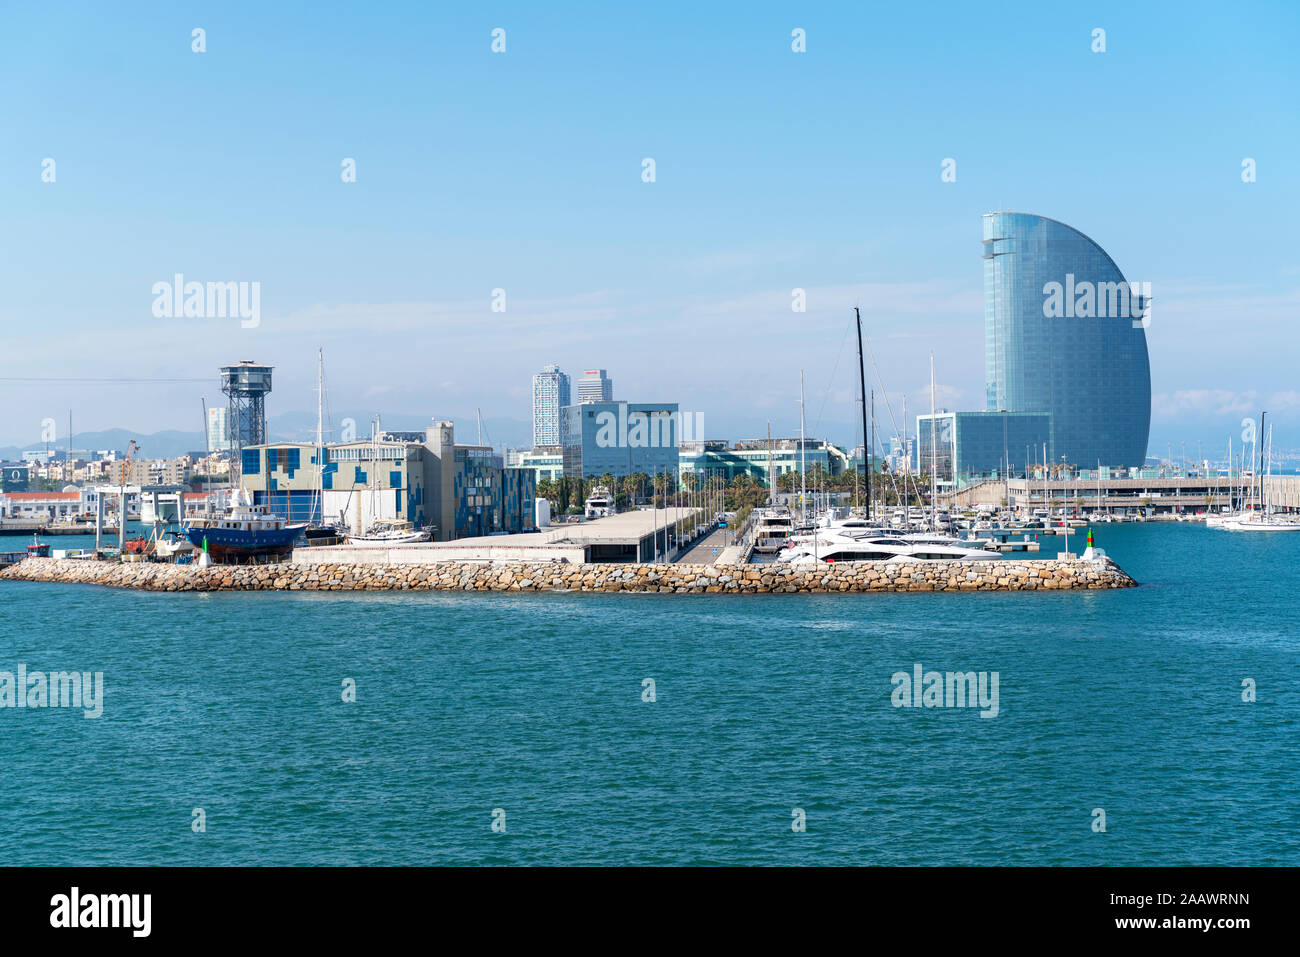 View to the port from Mediterranean Sea, Barcelona, Spain Stock Photo